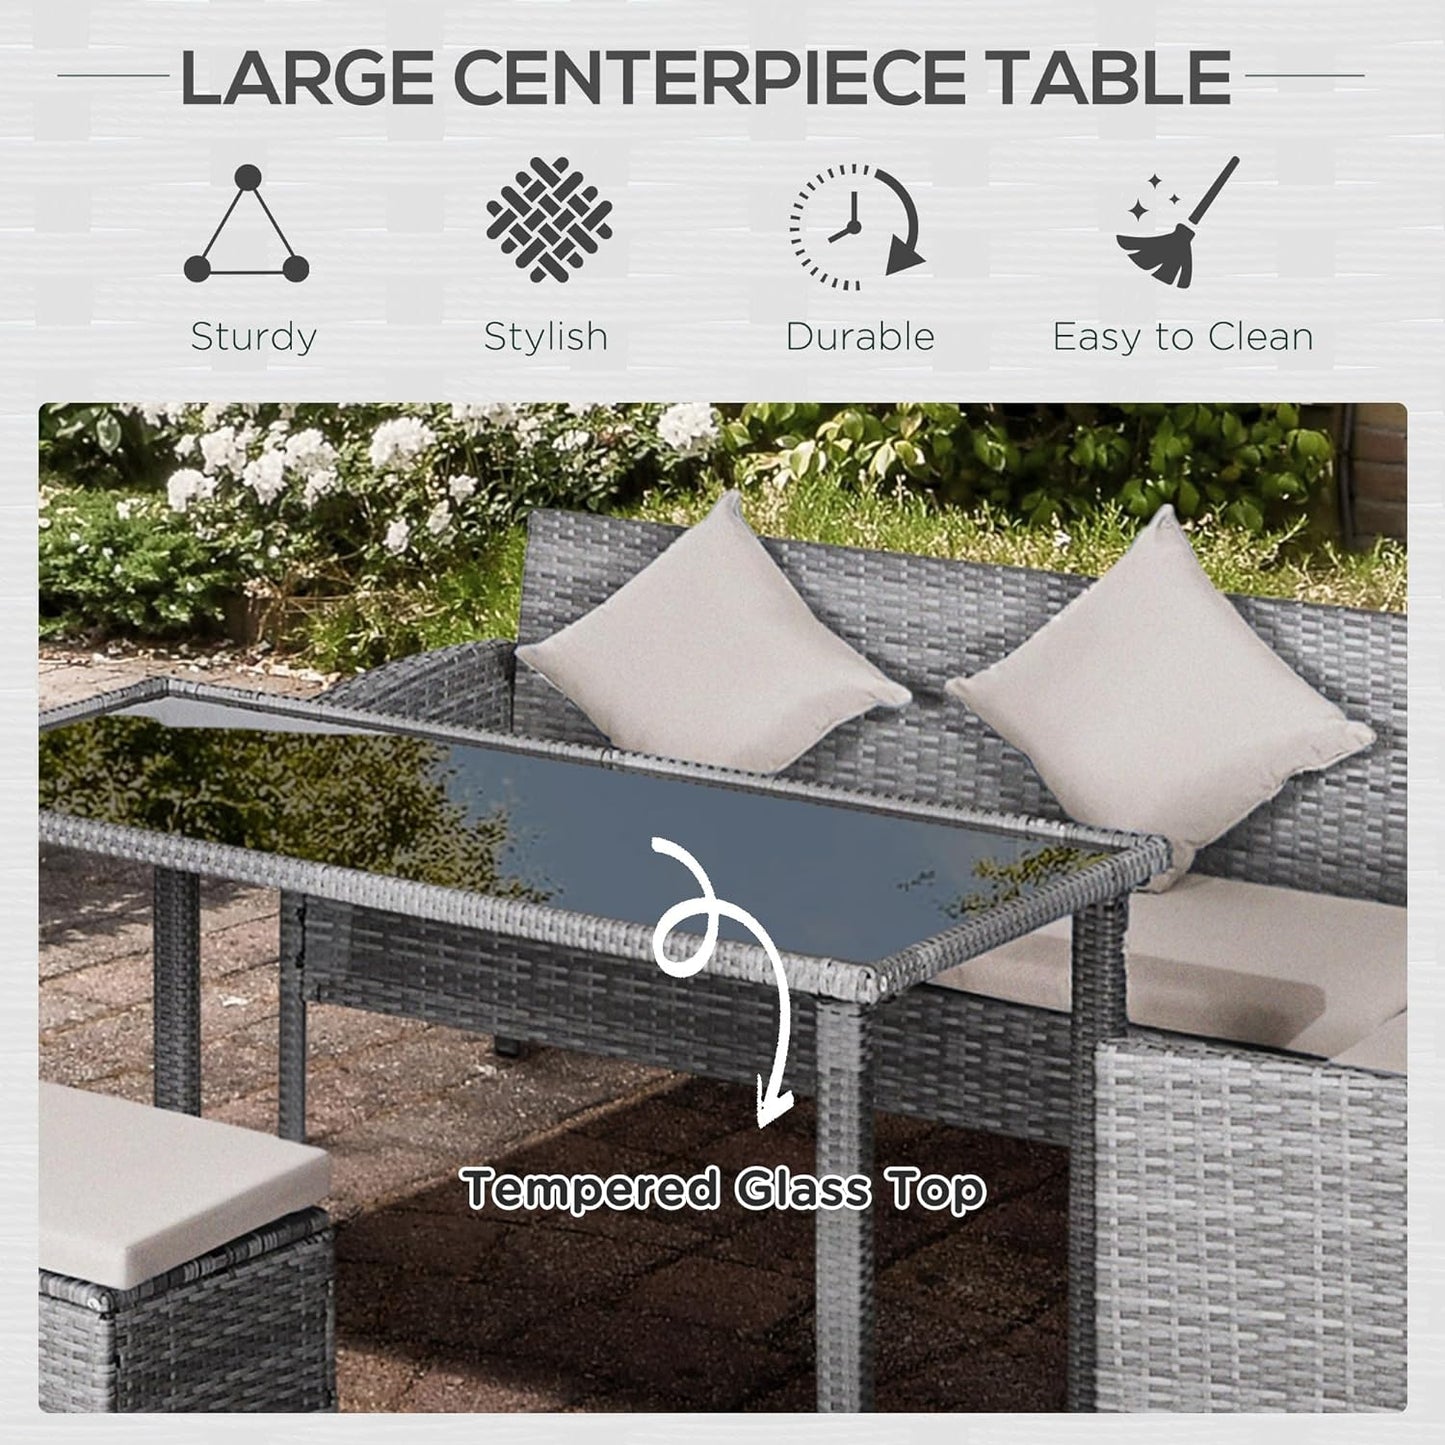 5 Pieces Wicker Patio Furniture Set with Padded Cushions, PE Rattan Conversation Furniture Sets W/Tempered Glass Top Dining Table and Two Ottomans, Cream White